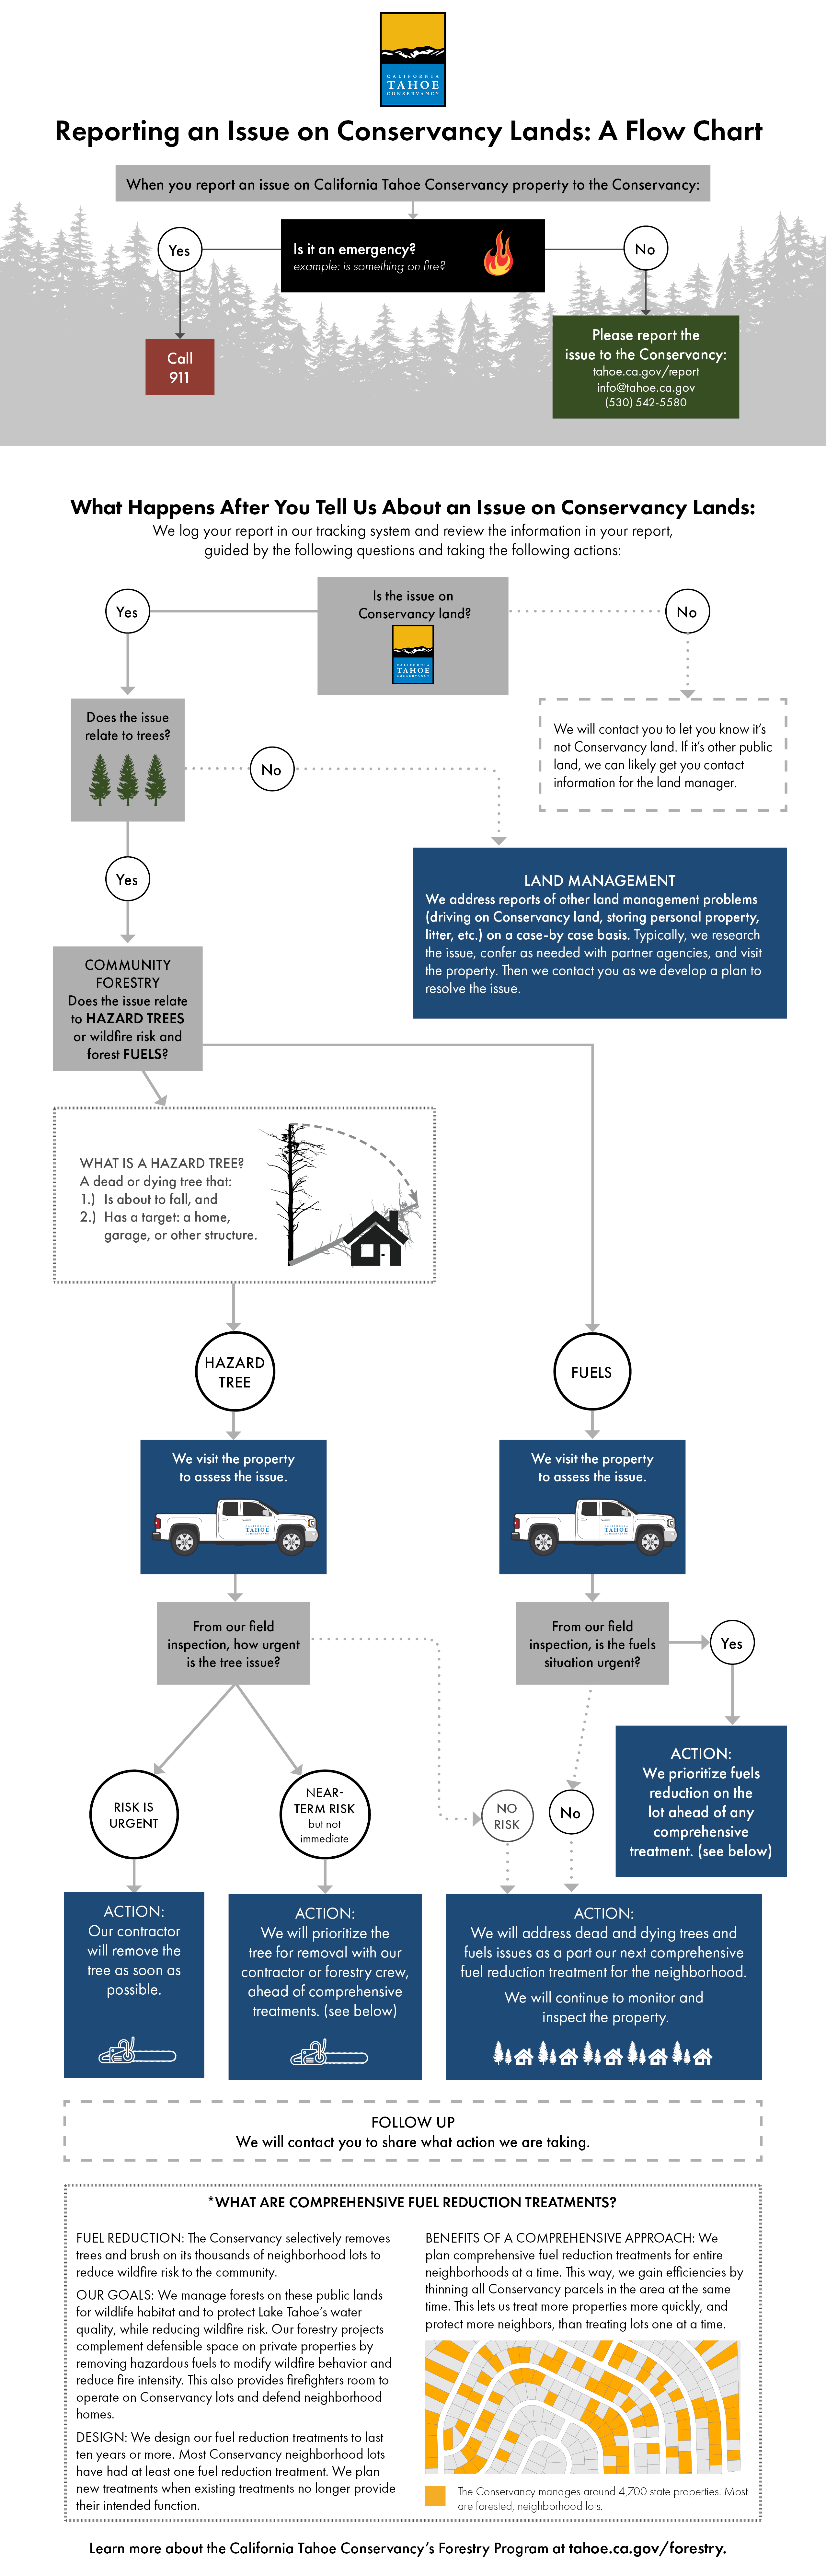 Flow chart showing what happens when you report an issue on Conservancy lands. Find a text version on the Conservancy website at tahoe.ca.gov.